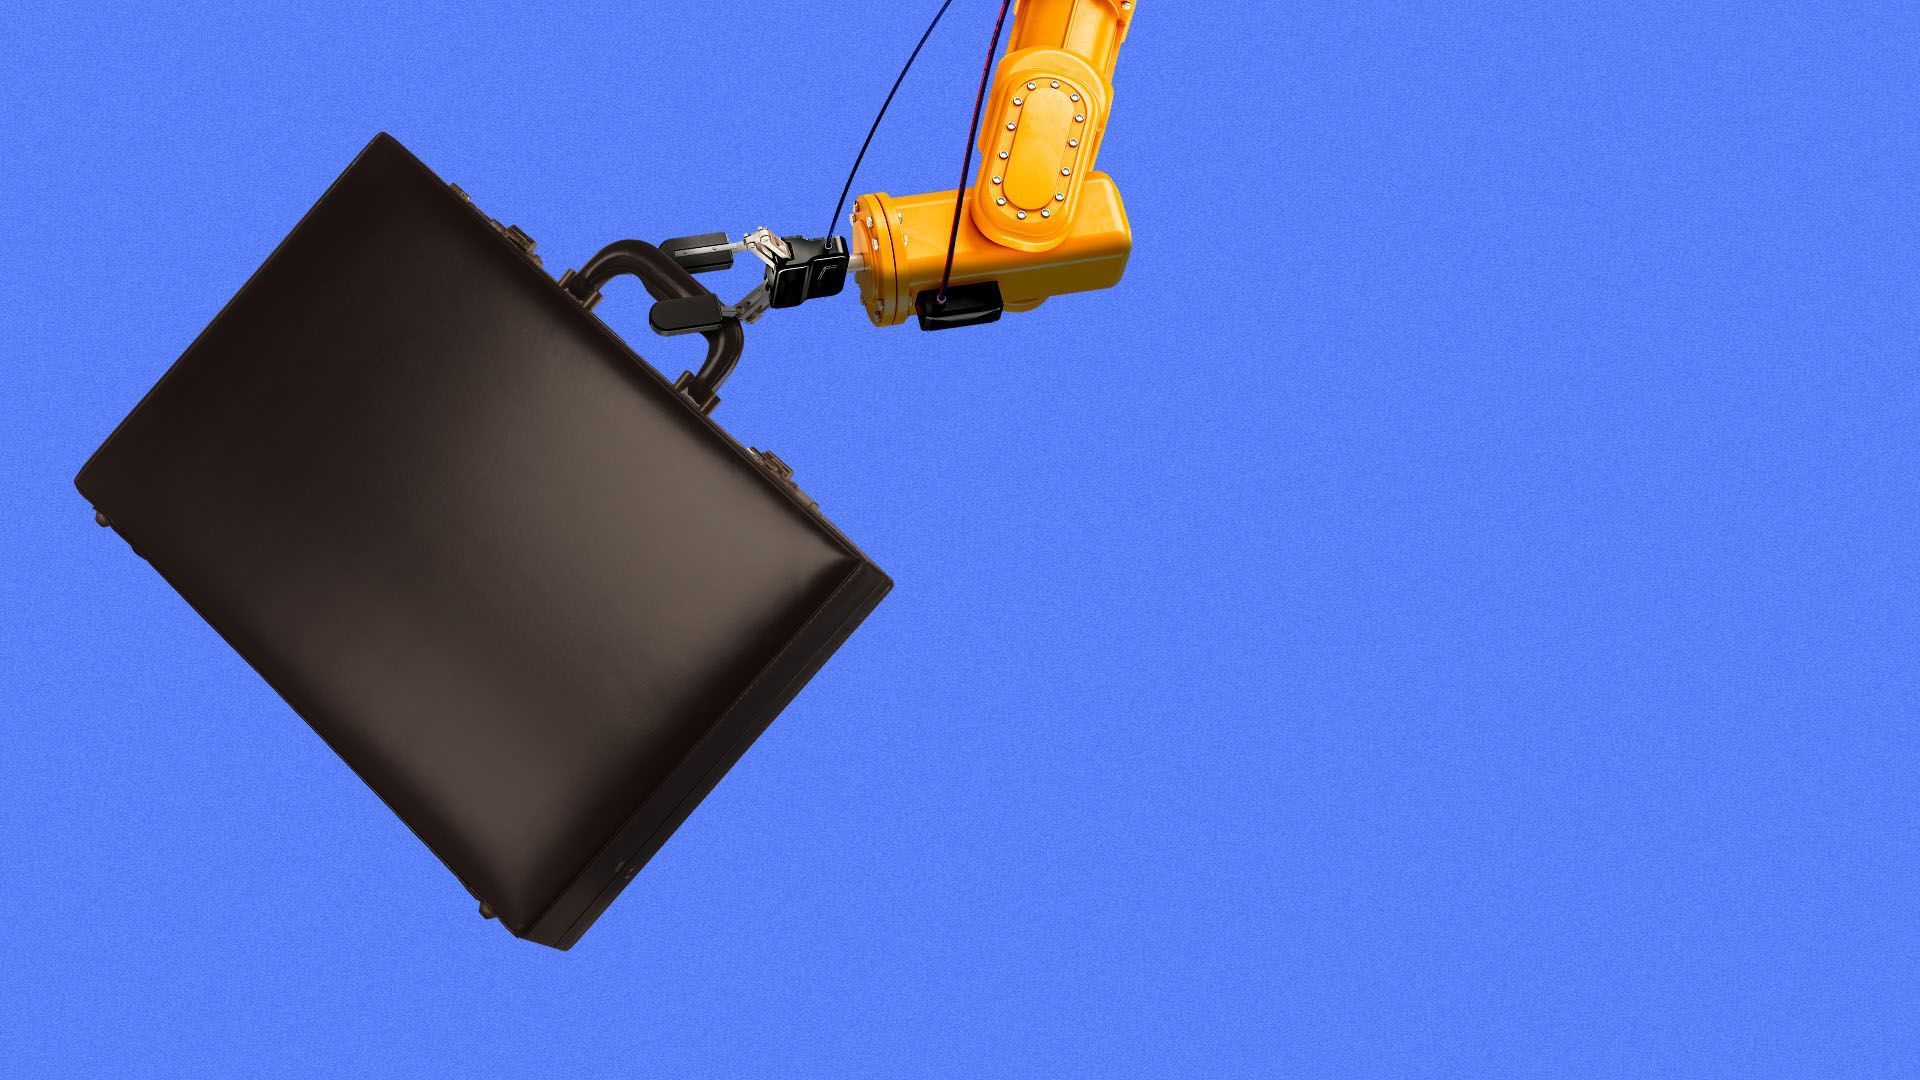 Illustration of a crane holding a suitcase.